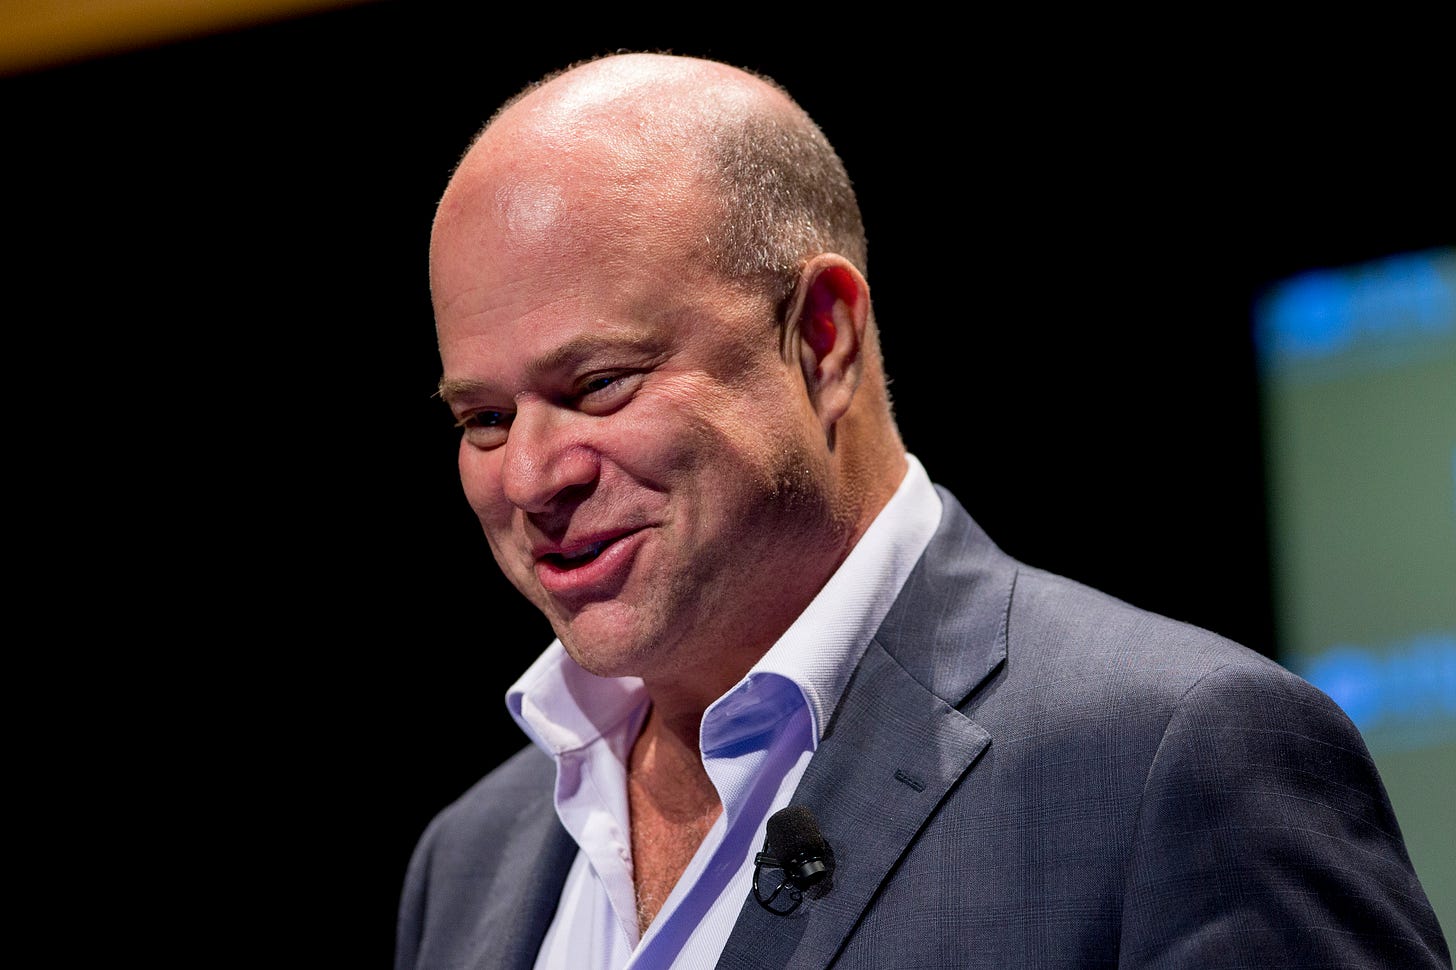 Will Owning the Carolina Panthers Distract David Tepper? - Bloomberg